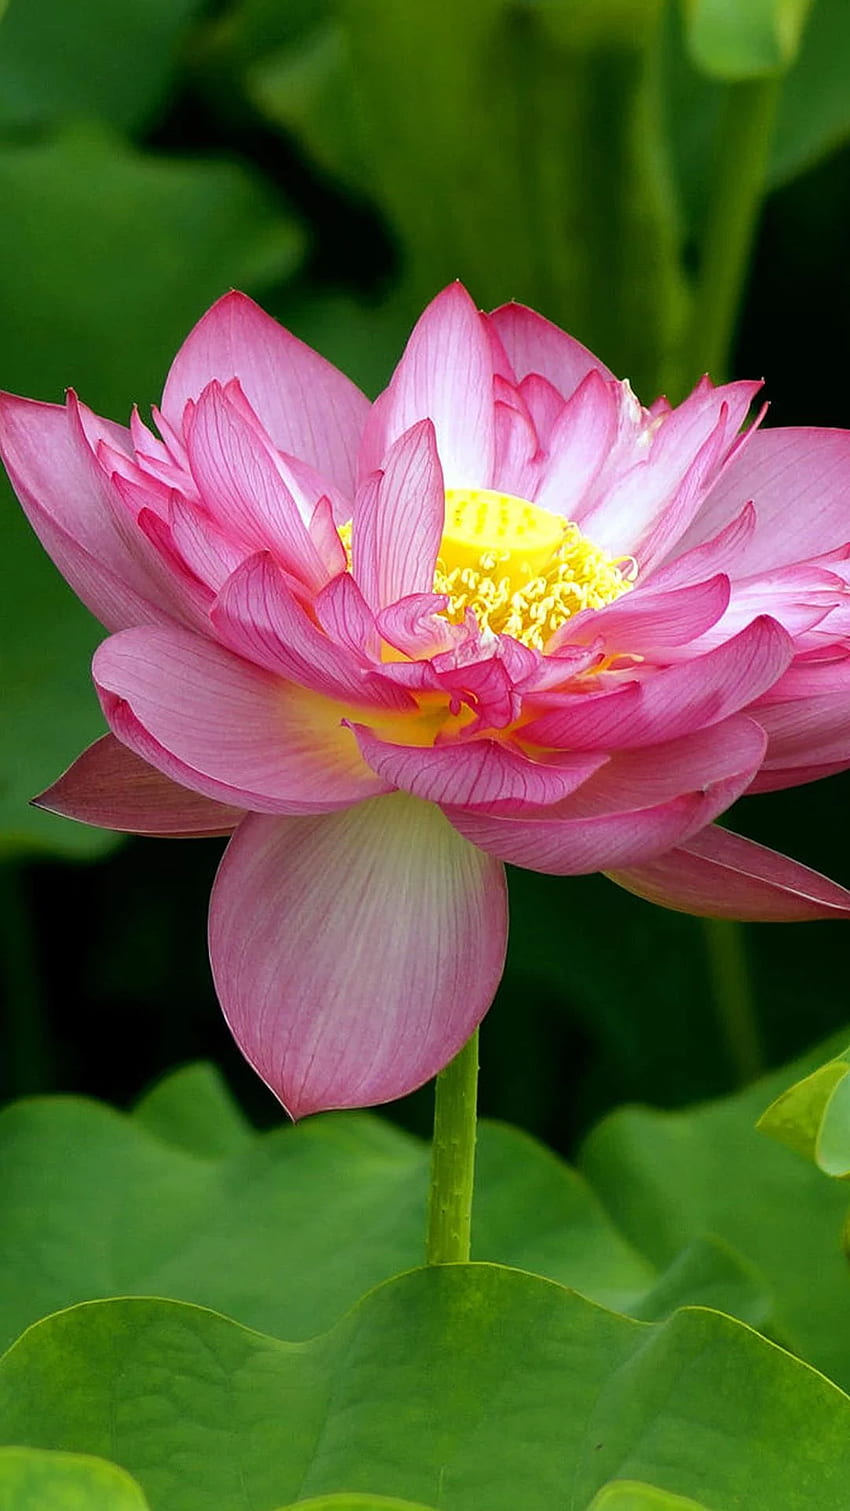 The leaves of the lotus Samsung Galaxy S5, Samsung Galaxy S5 HD phone wallpaper